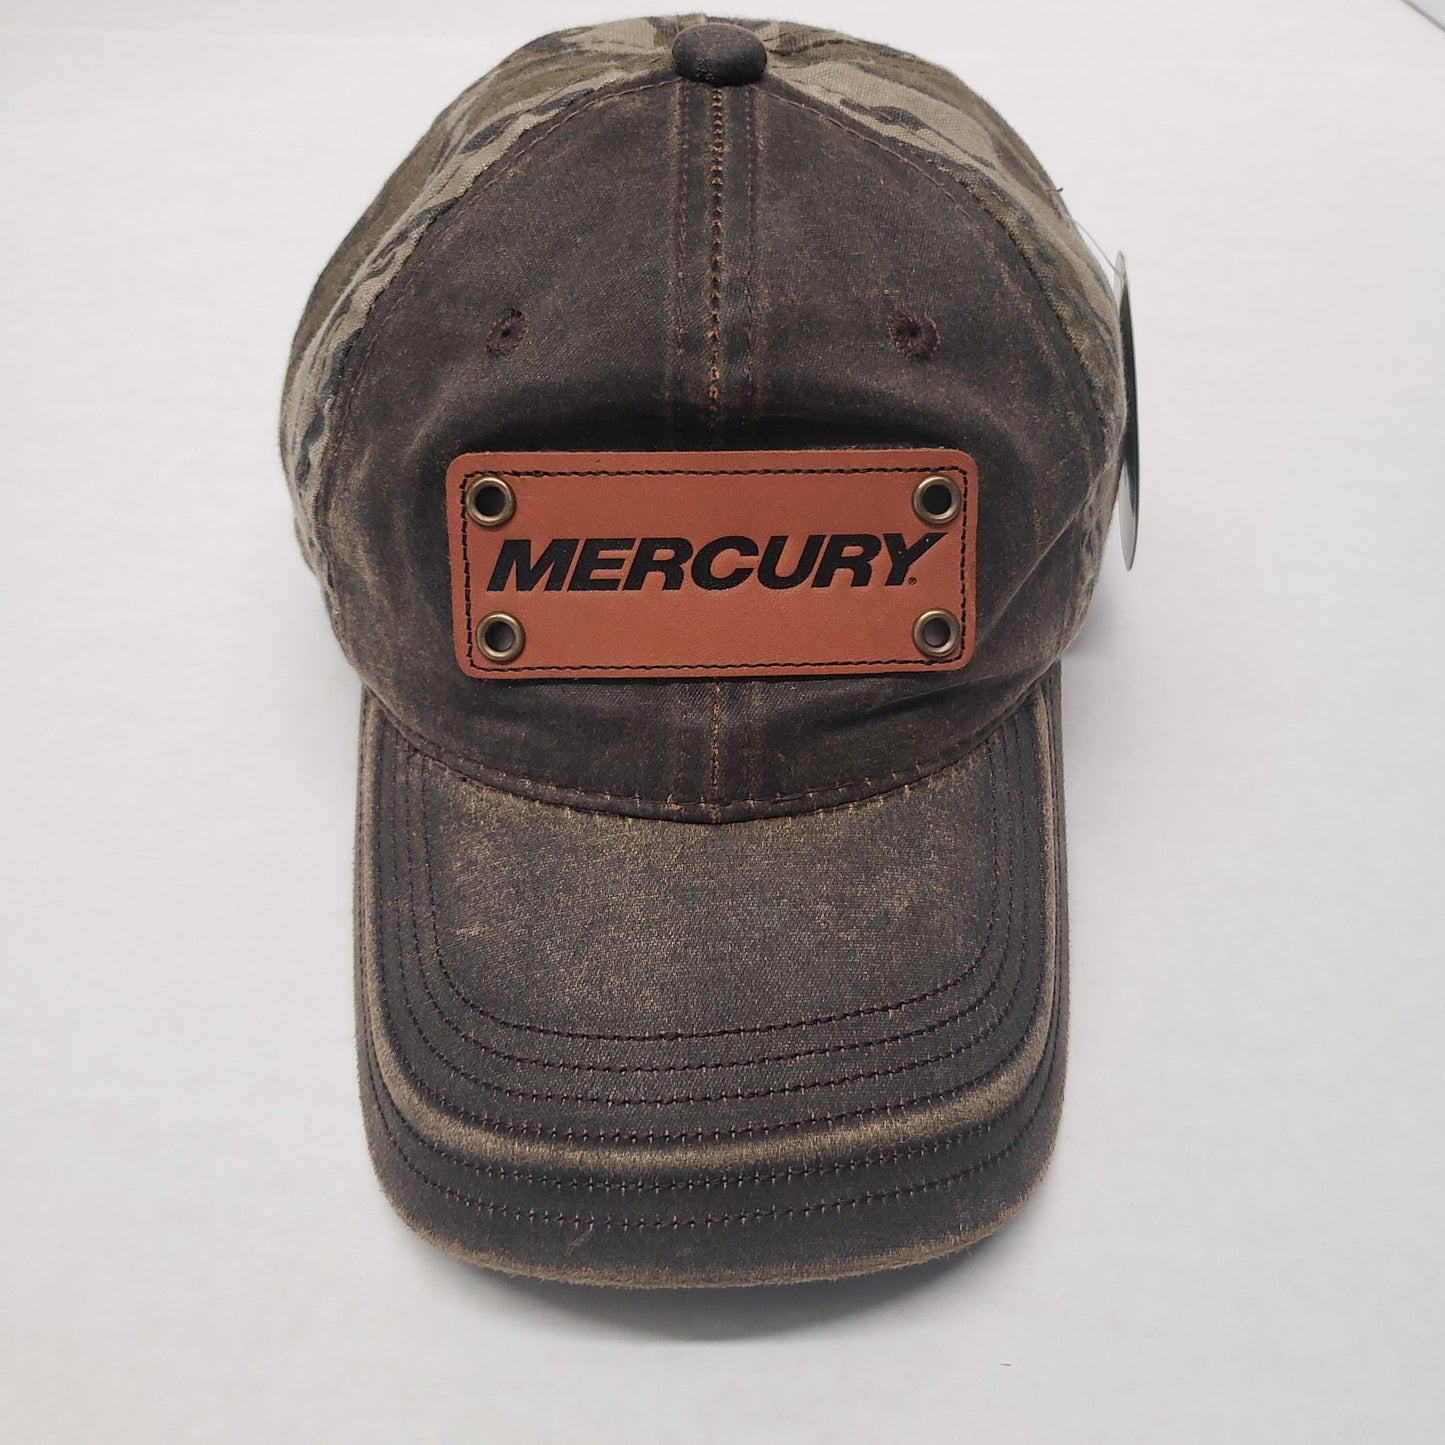 New Authentic Mercury Marine Hat Weathered Brown w/Leather Patch Camo Back